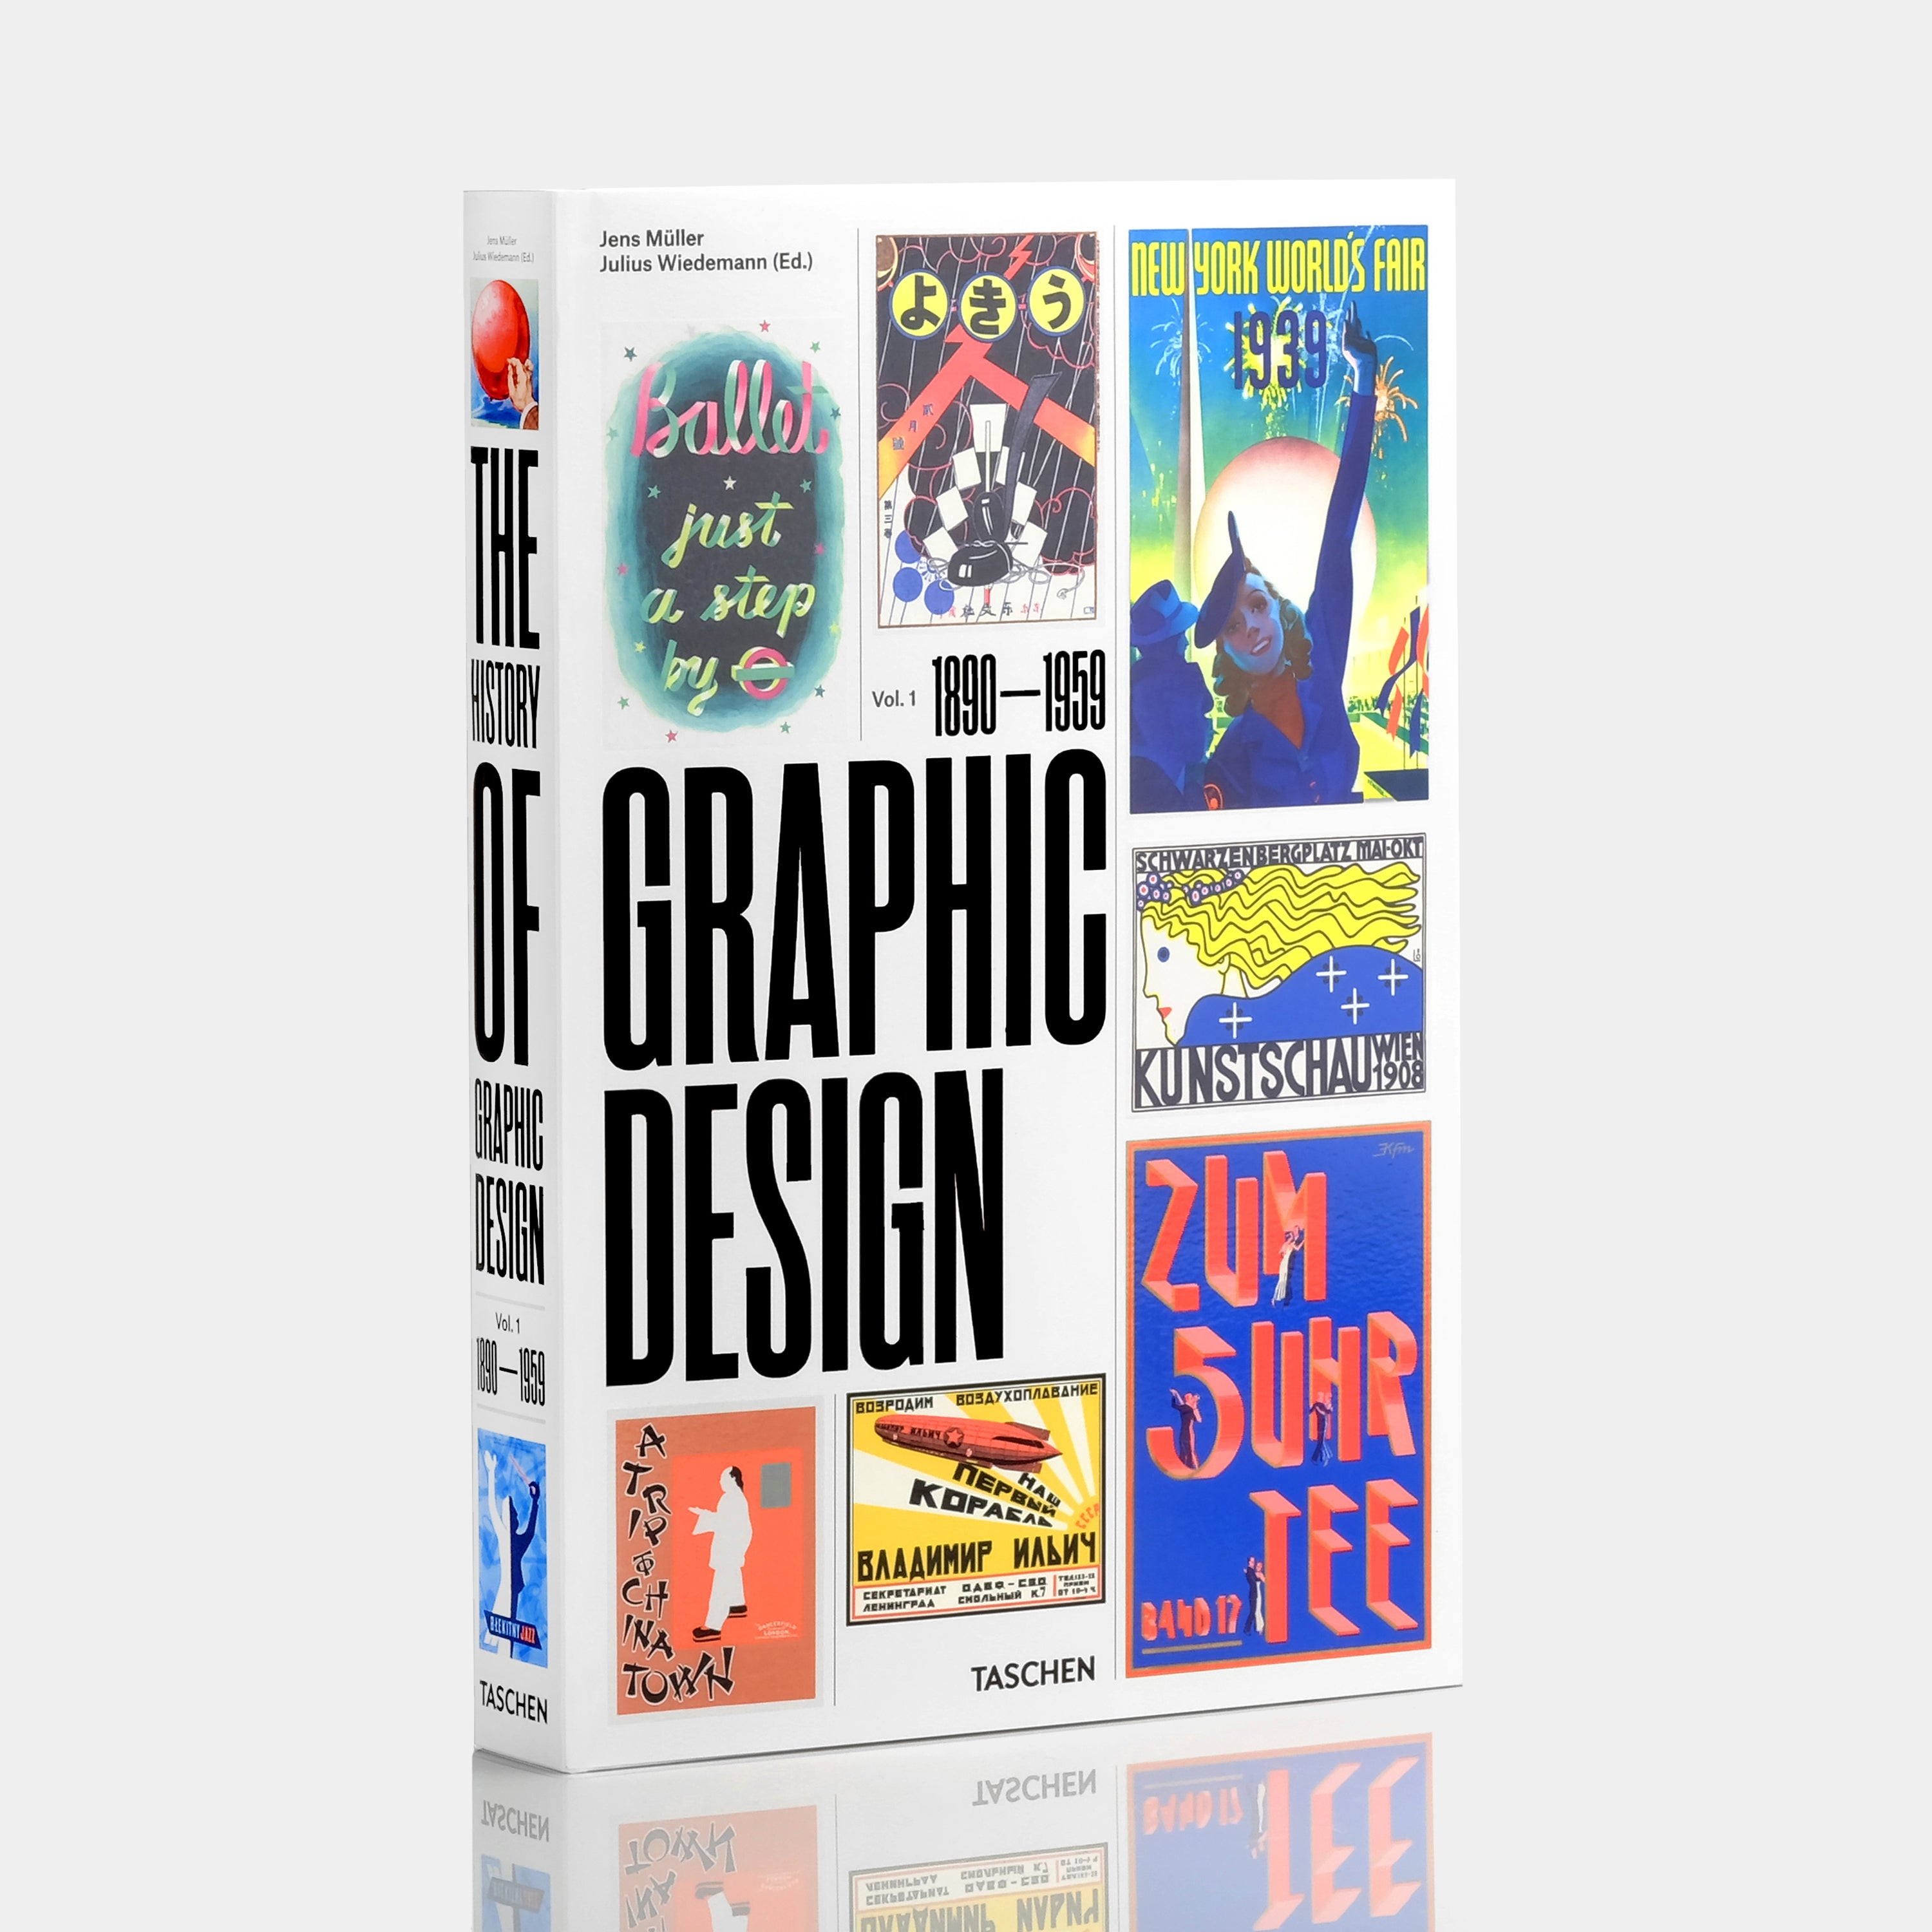 The History of Graphic Design: Vol. 1. (1890–1959) by Jens Müller XL Taschen Book